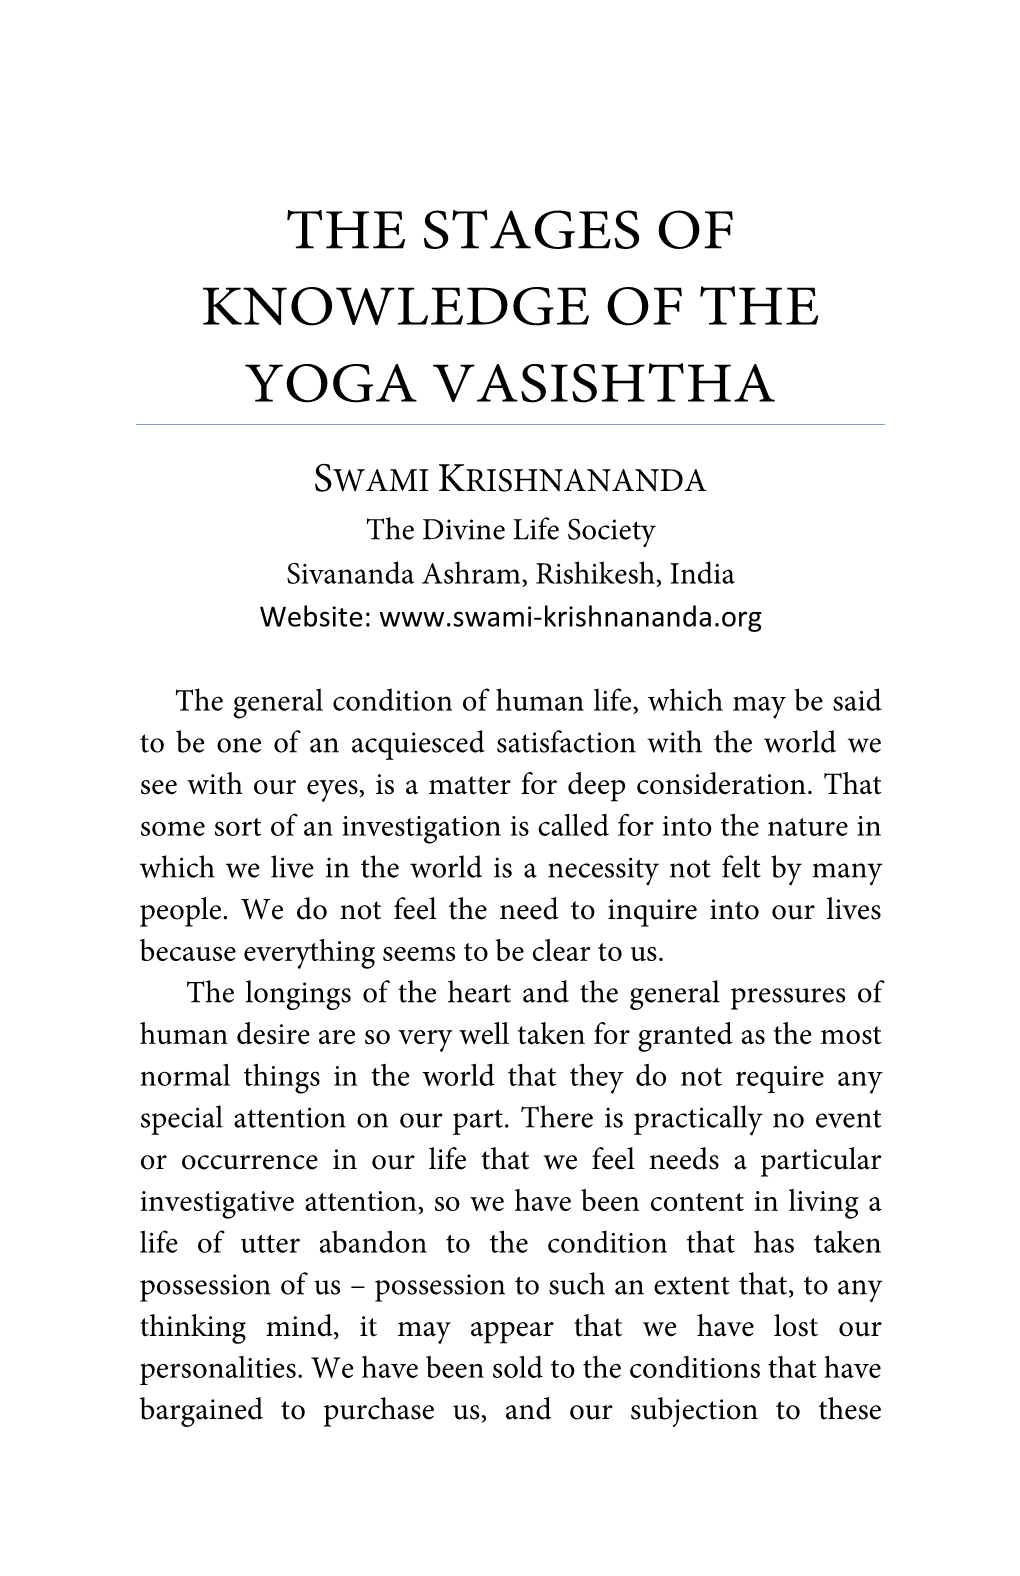 The Stages of Knowledge of the Yoga Vasishtha